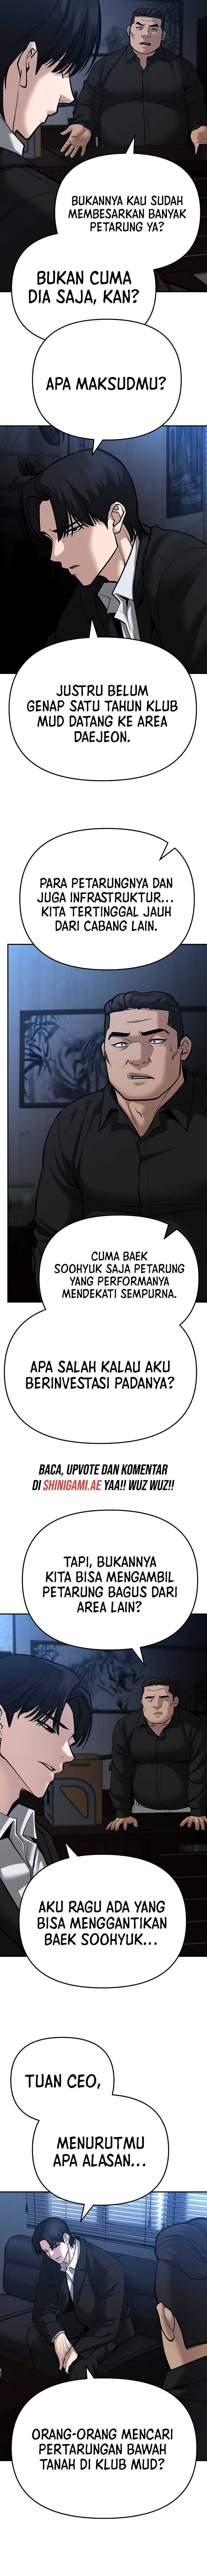 The Bully In Charge Chapter 87